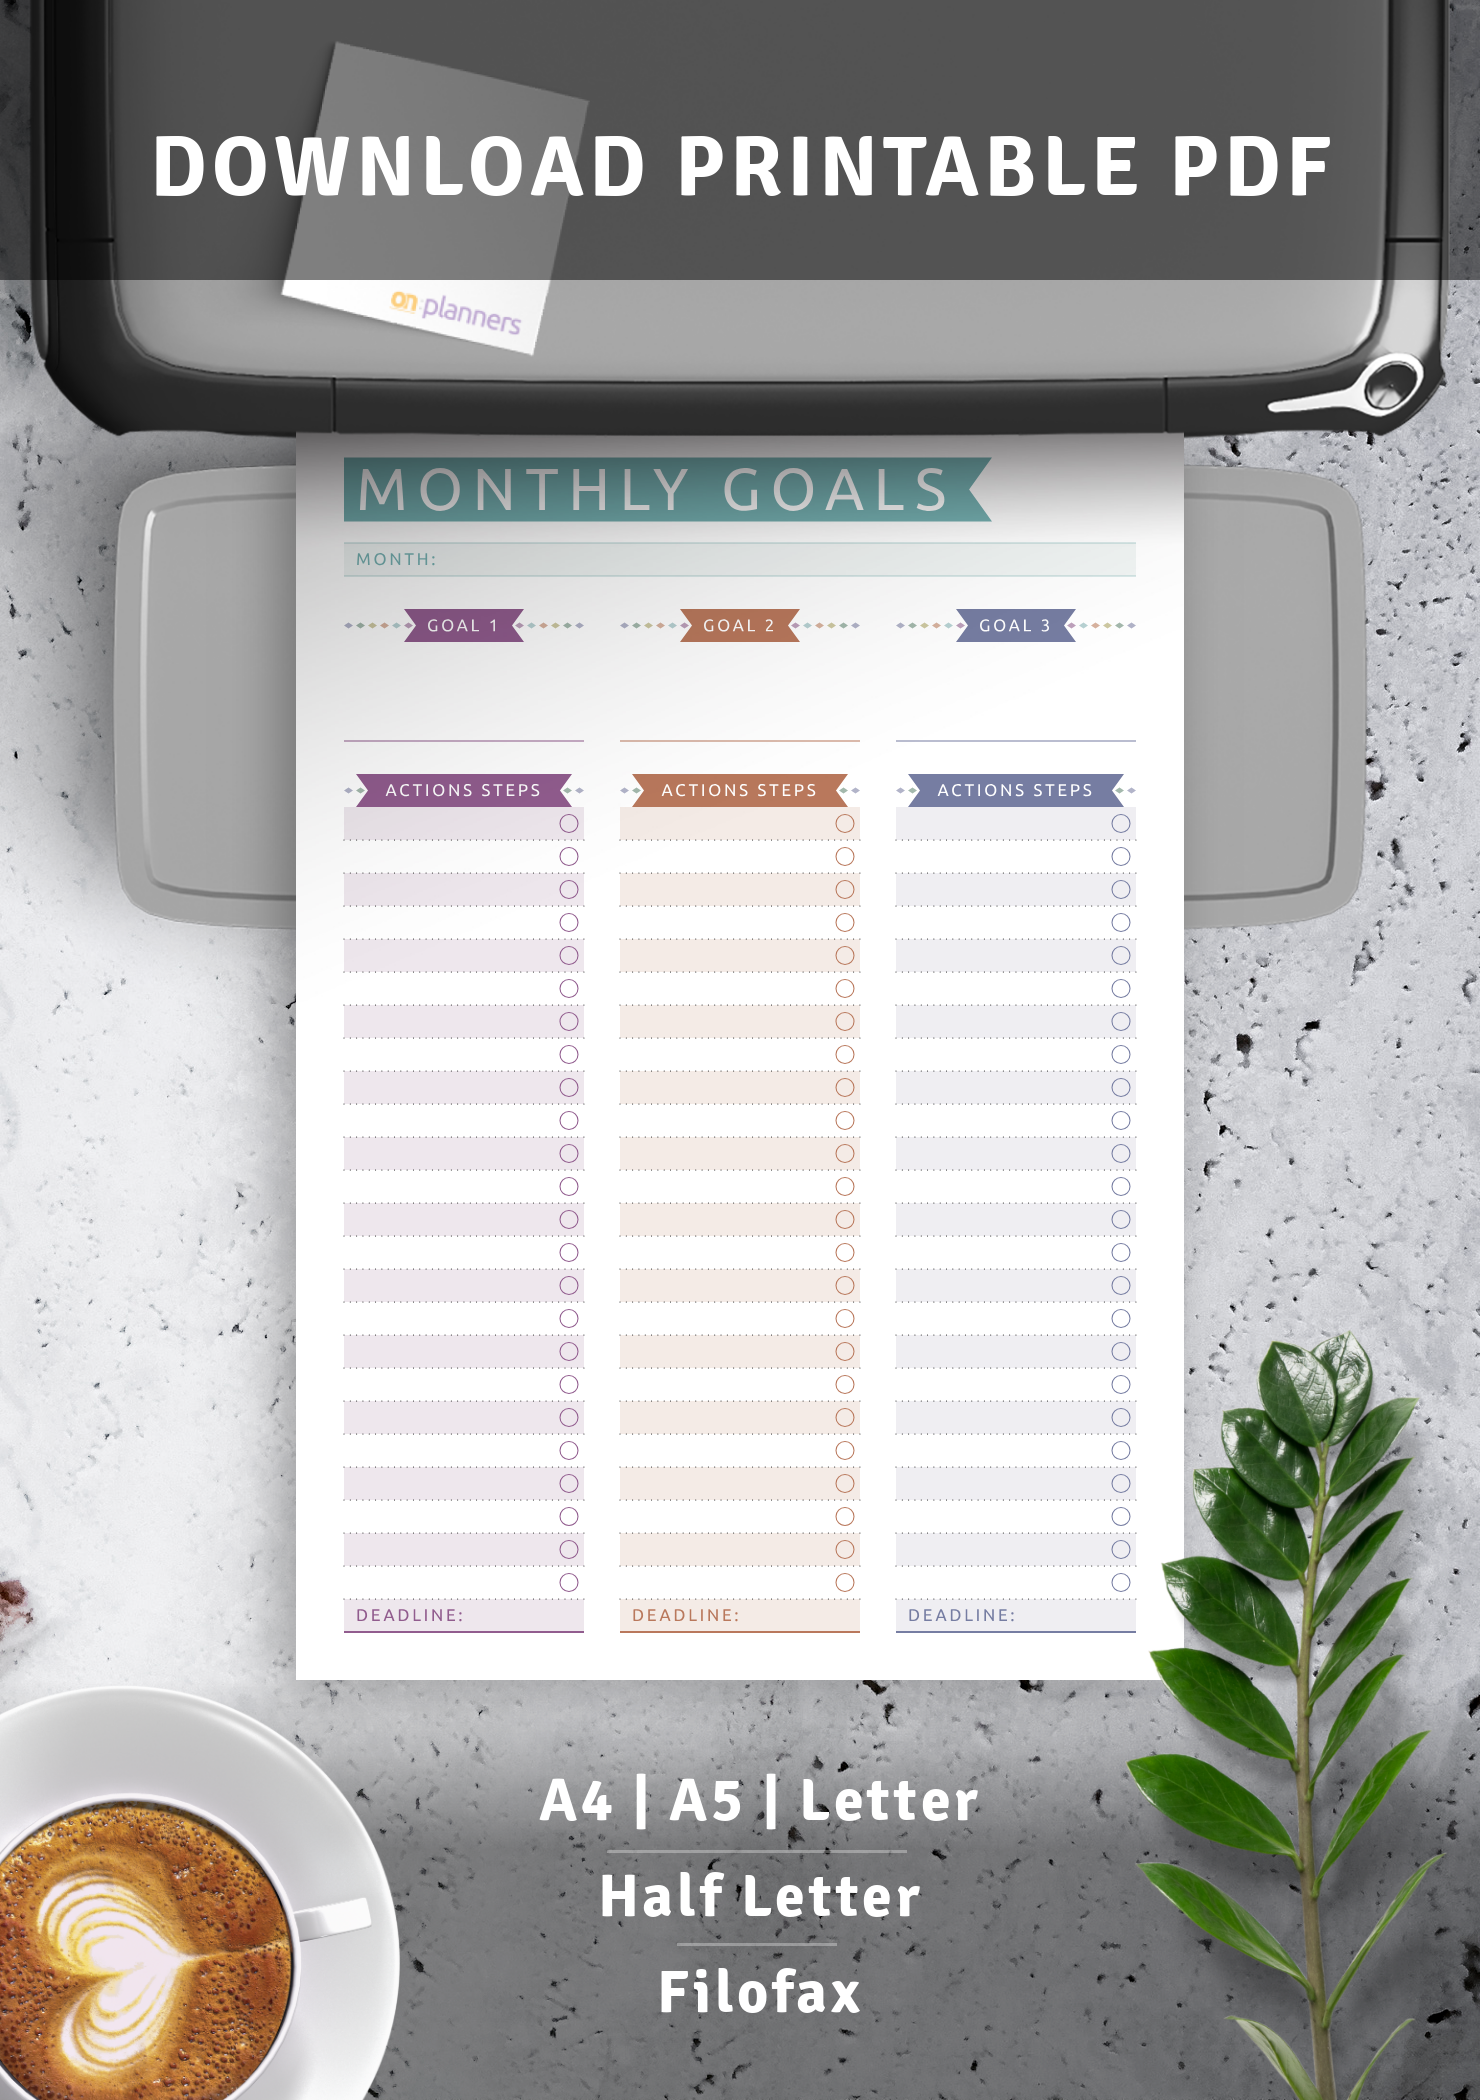 Download Printable Monthly Goals With Action Steps Casual Style Pdf